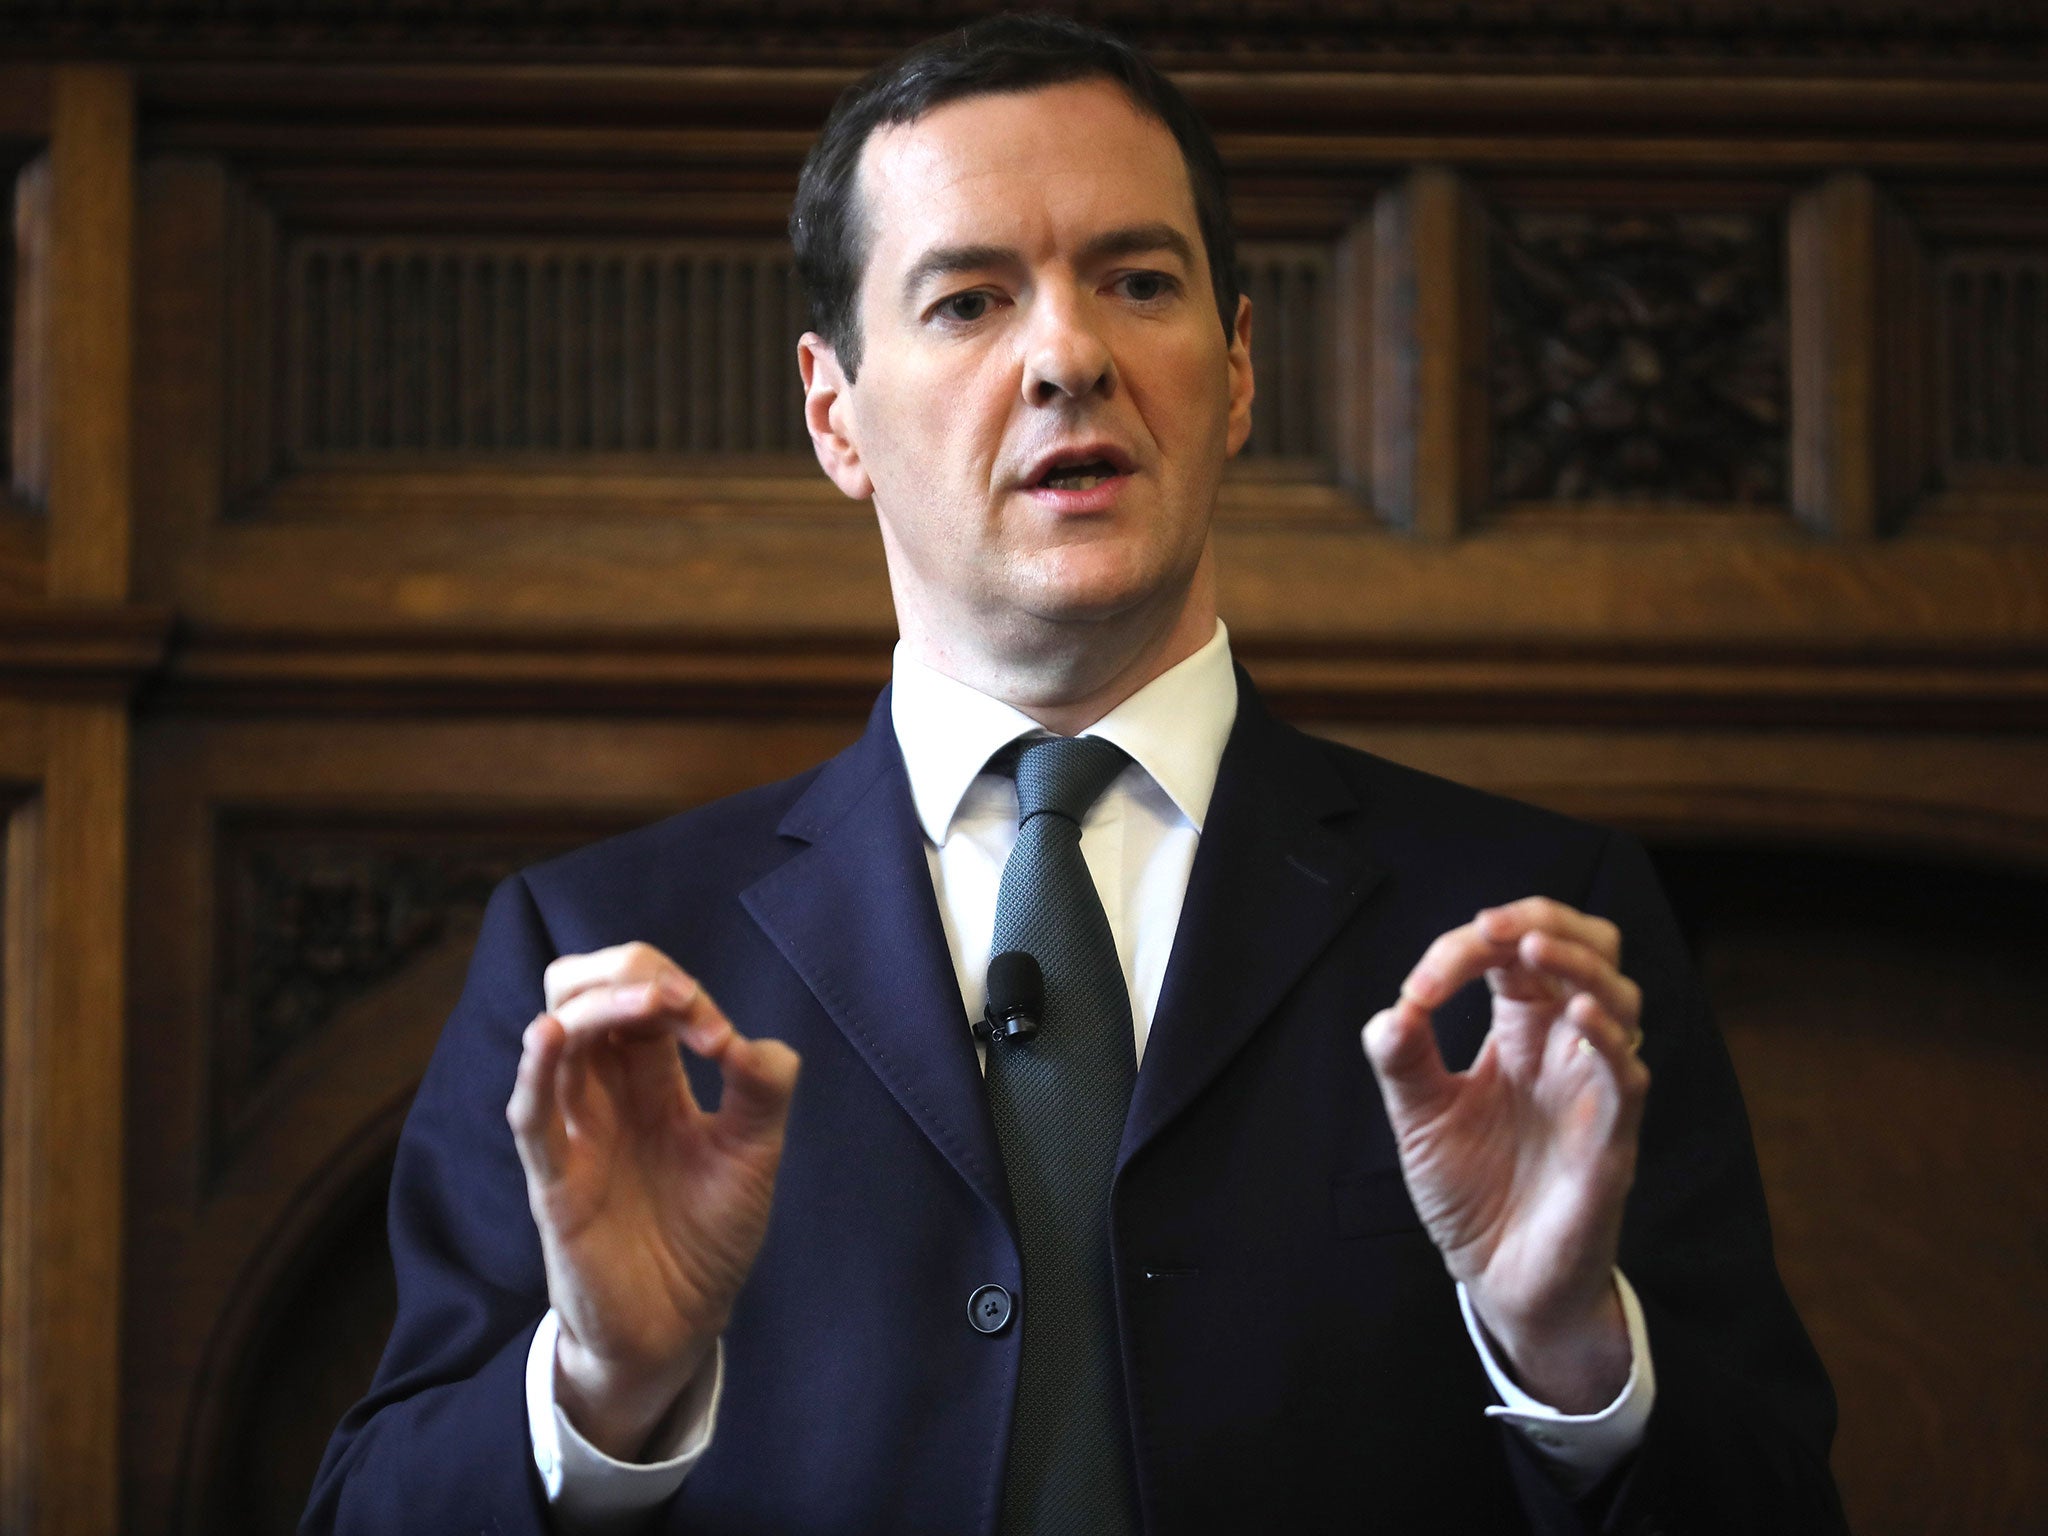 George Osborne says the Treasury would "stand in concert with the Bank" to support more stimulus